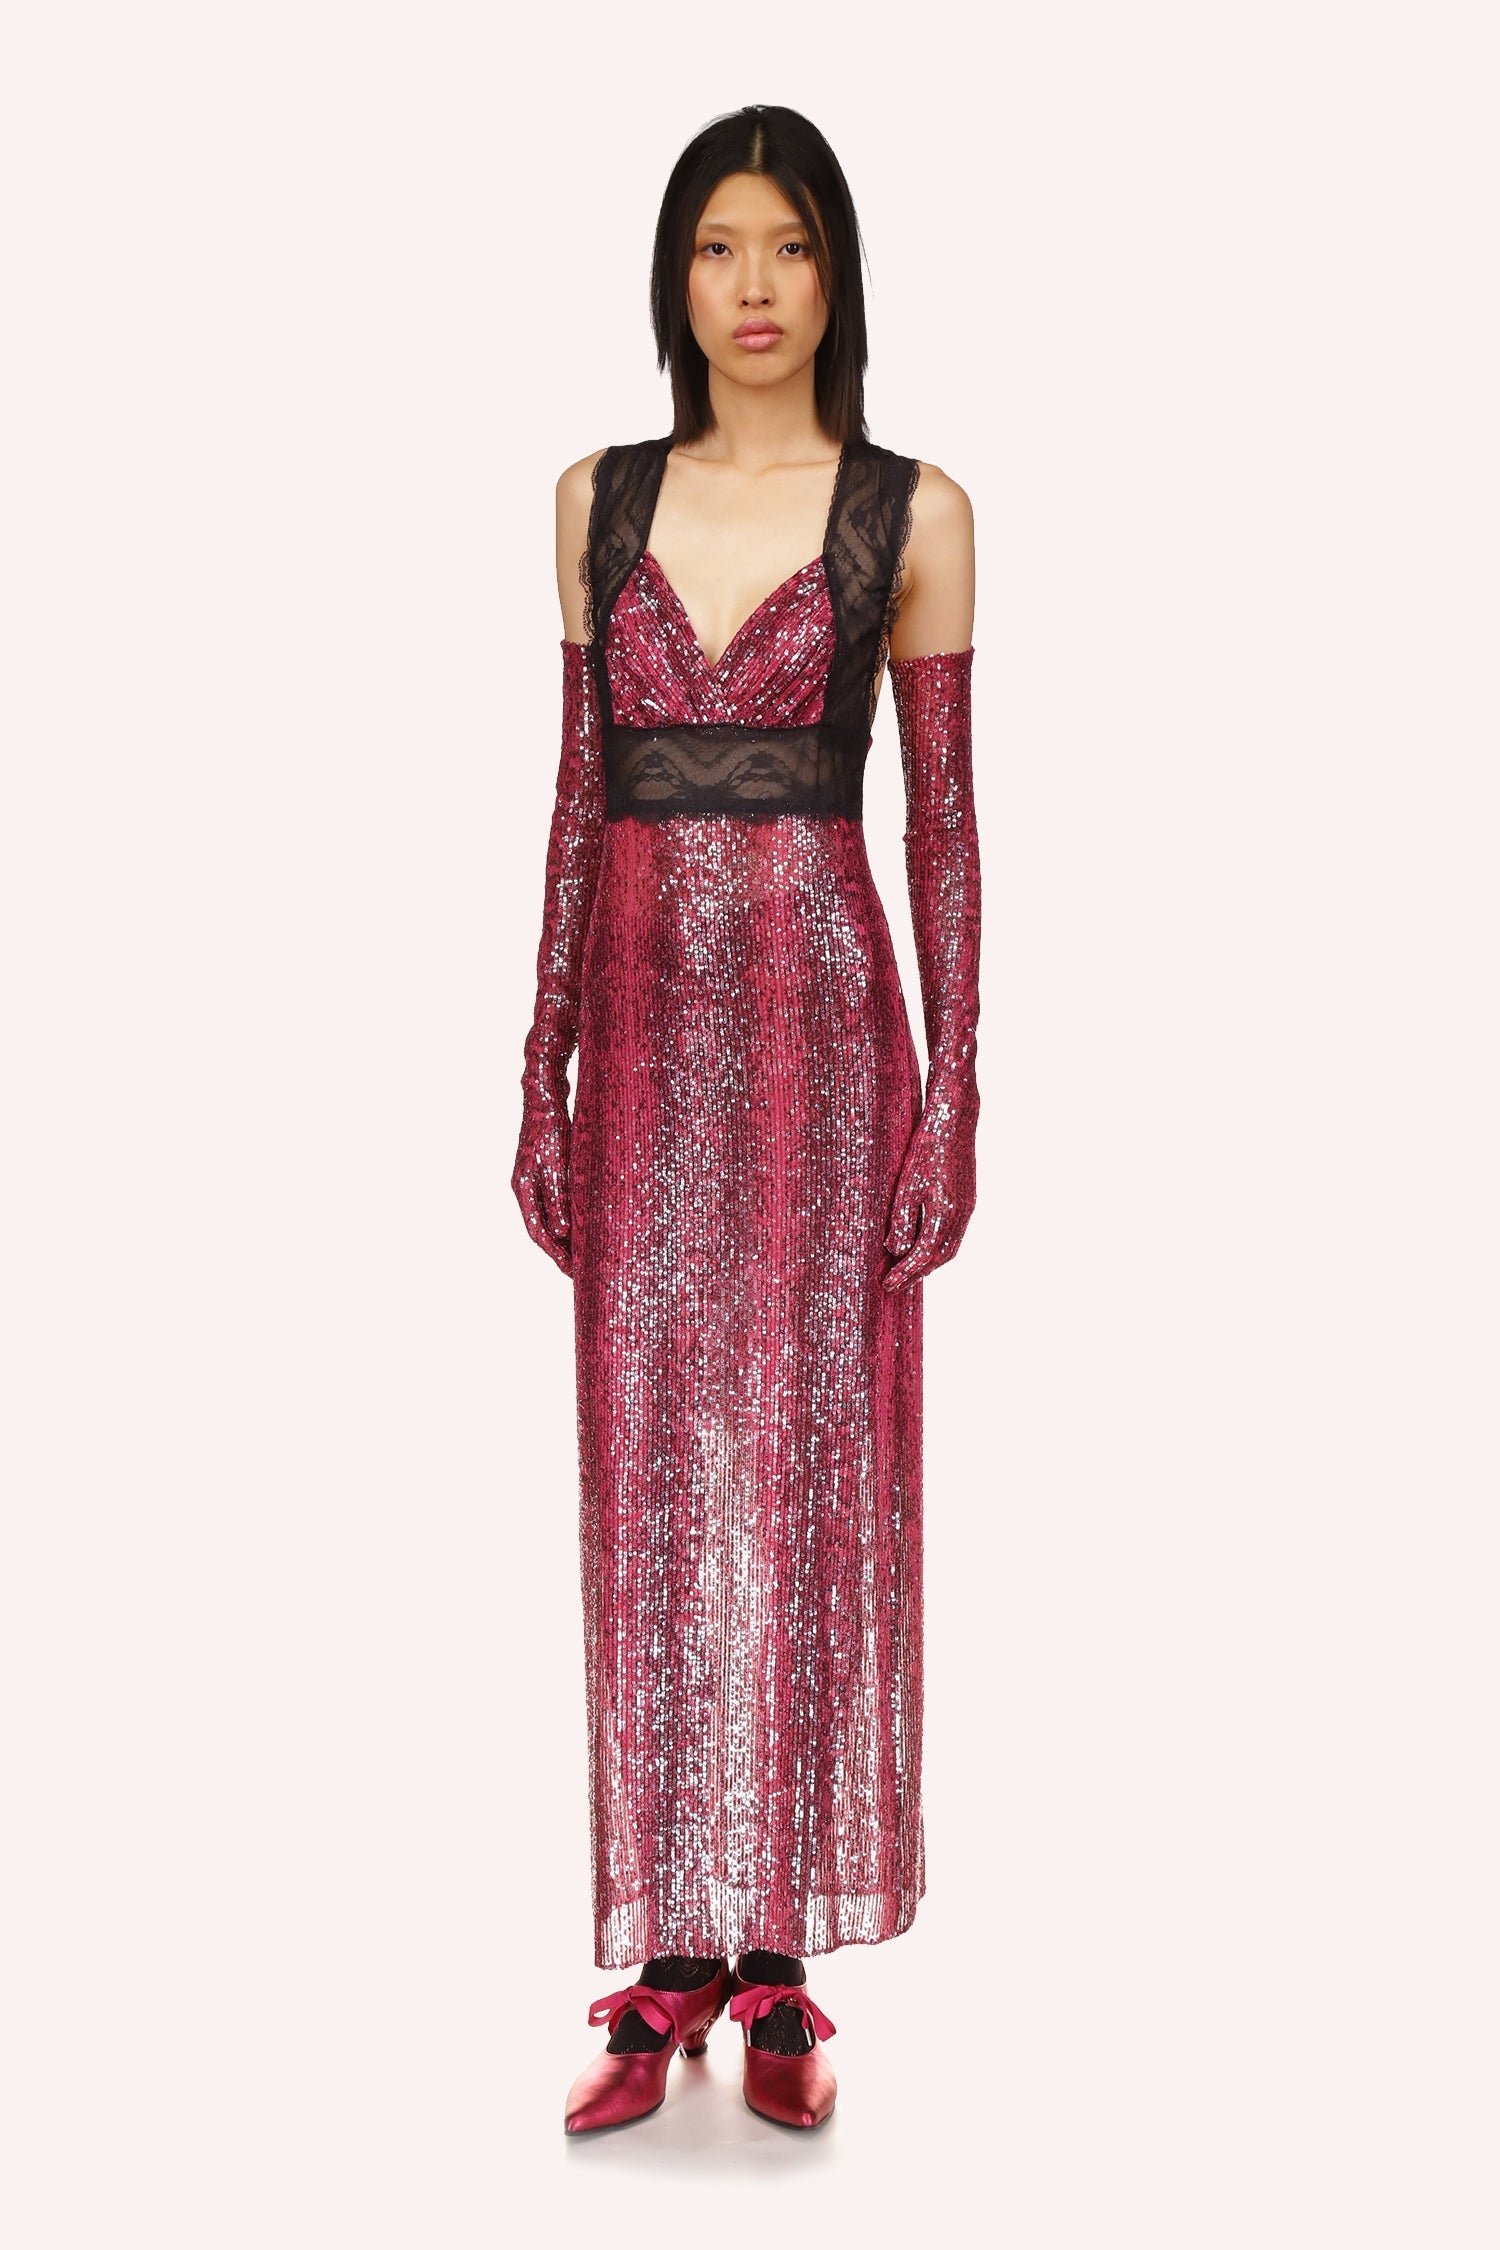 Anna Sui's Red Snakeskin Dress is a long V-neck cut dress with black lace under the bust and over the shoulders